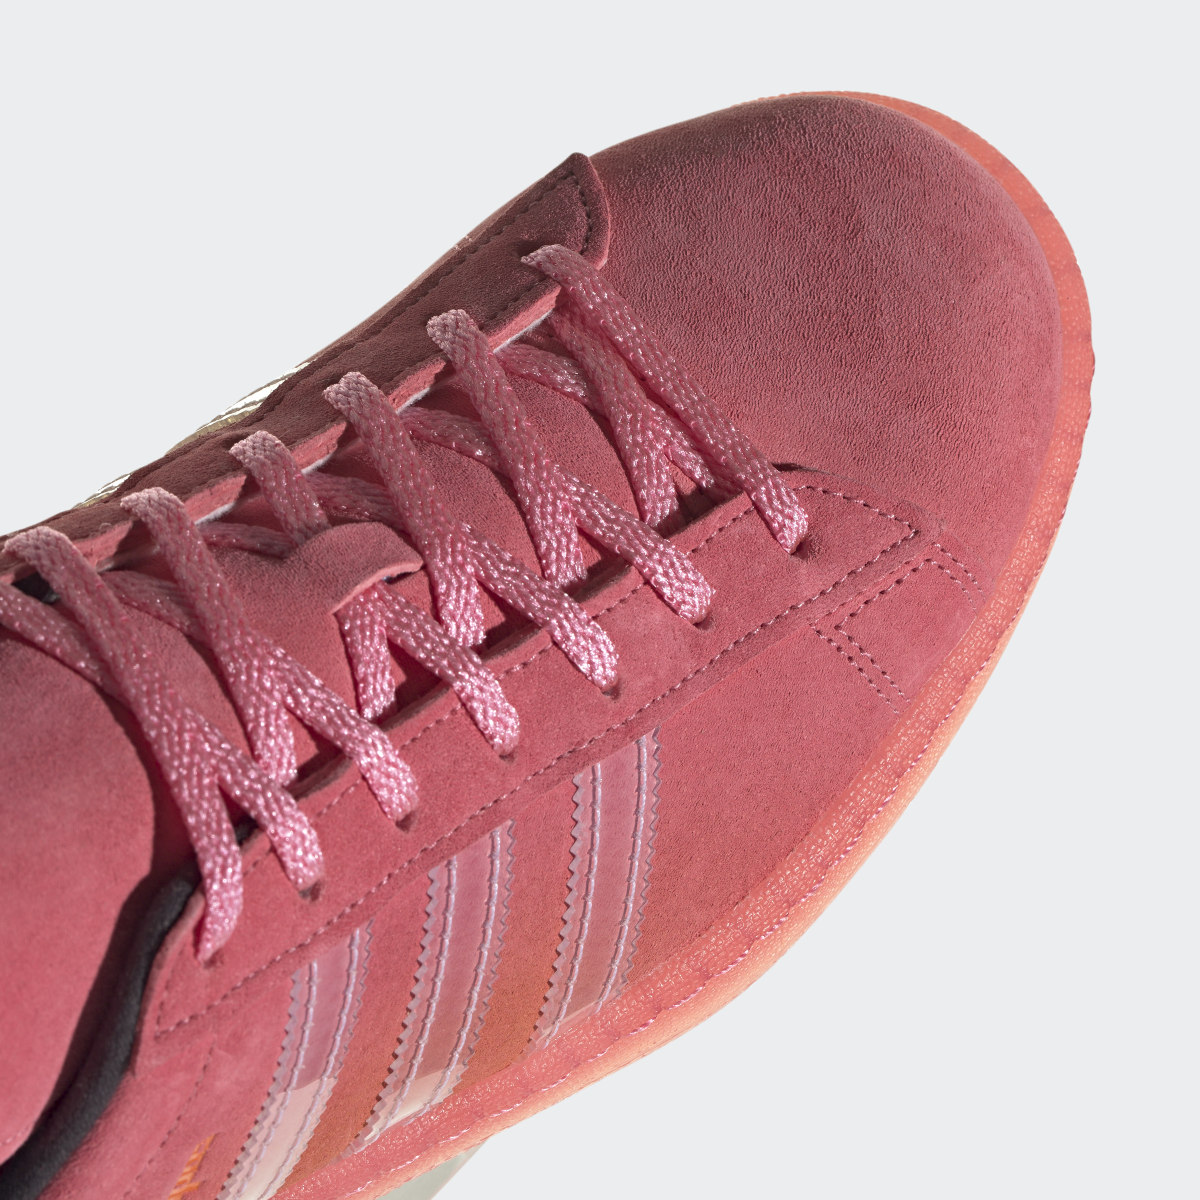 Adidas Campus 80s Shoes. 9